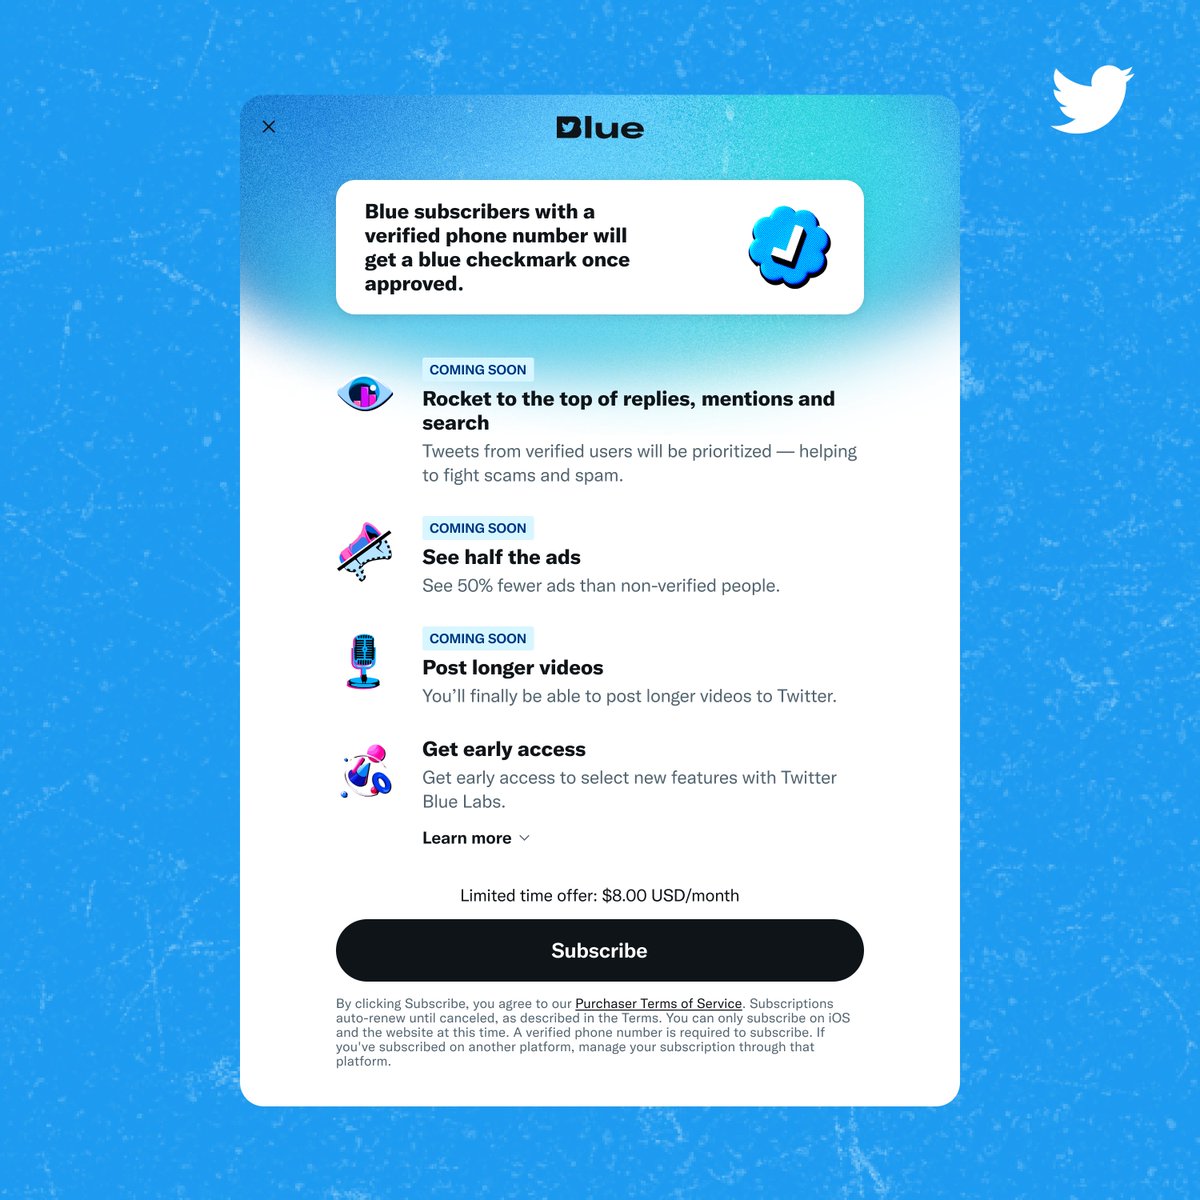 The new Twitter Blue subscription page on web that lists the features included with a subscription. At the top it reads, “Blue subscribers with a verified phone number will get a blue checkmark once approved”. Under that it lists “Rocket to the top of replies, mentions and search”, “See half the ads”, and “Post longer videos”, each labeled as “coming soon”. The list ends with “Get early access” and explains Twitter Blue Labs gives access to select new features. Toward the bottom of the screen it reads, “Limited time offer: $8.00 USD/month” with the button to subscribe underneath.